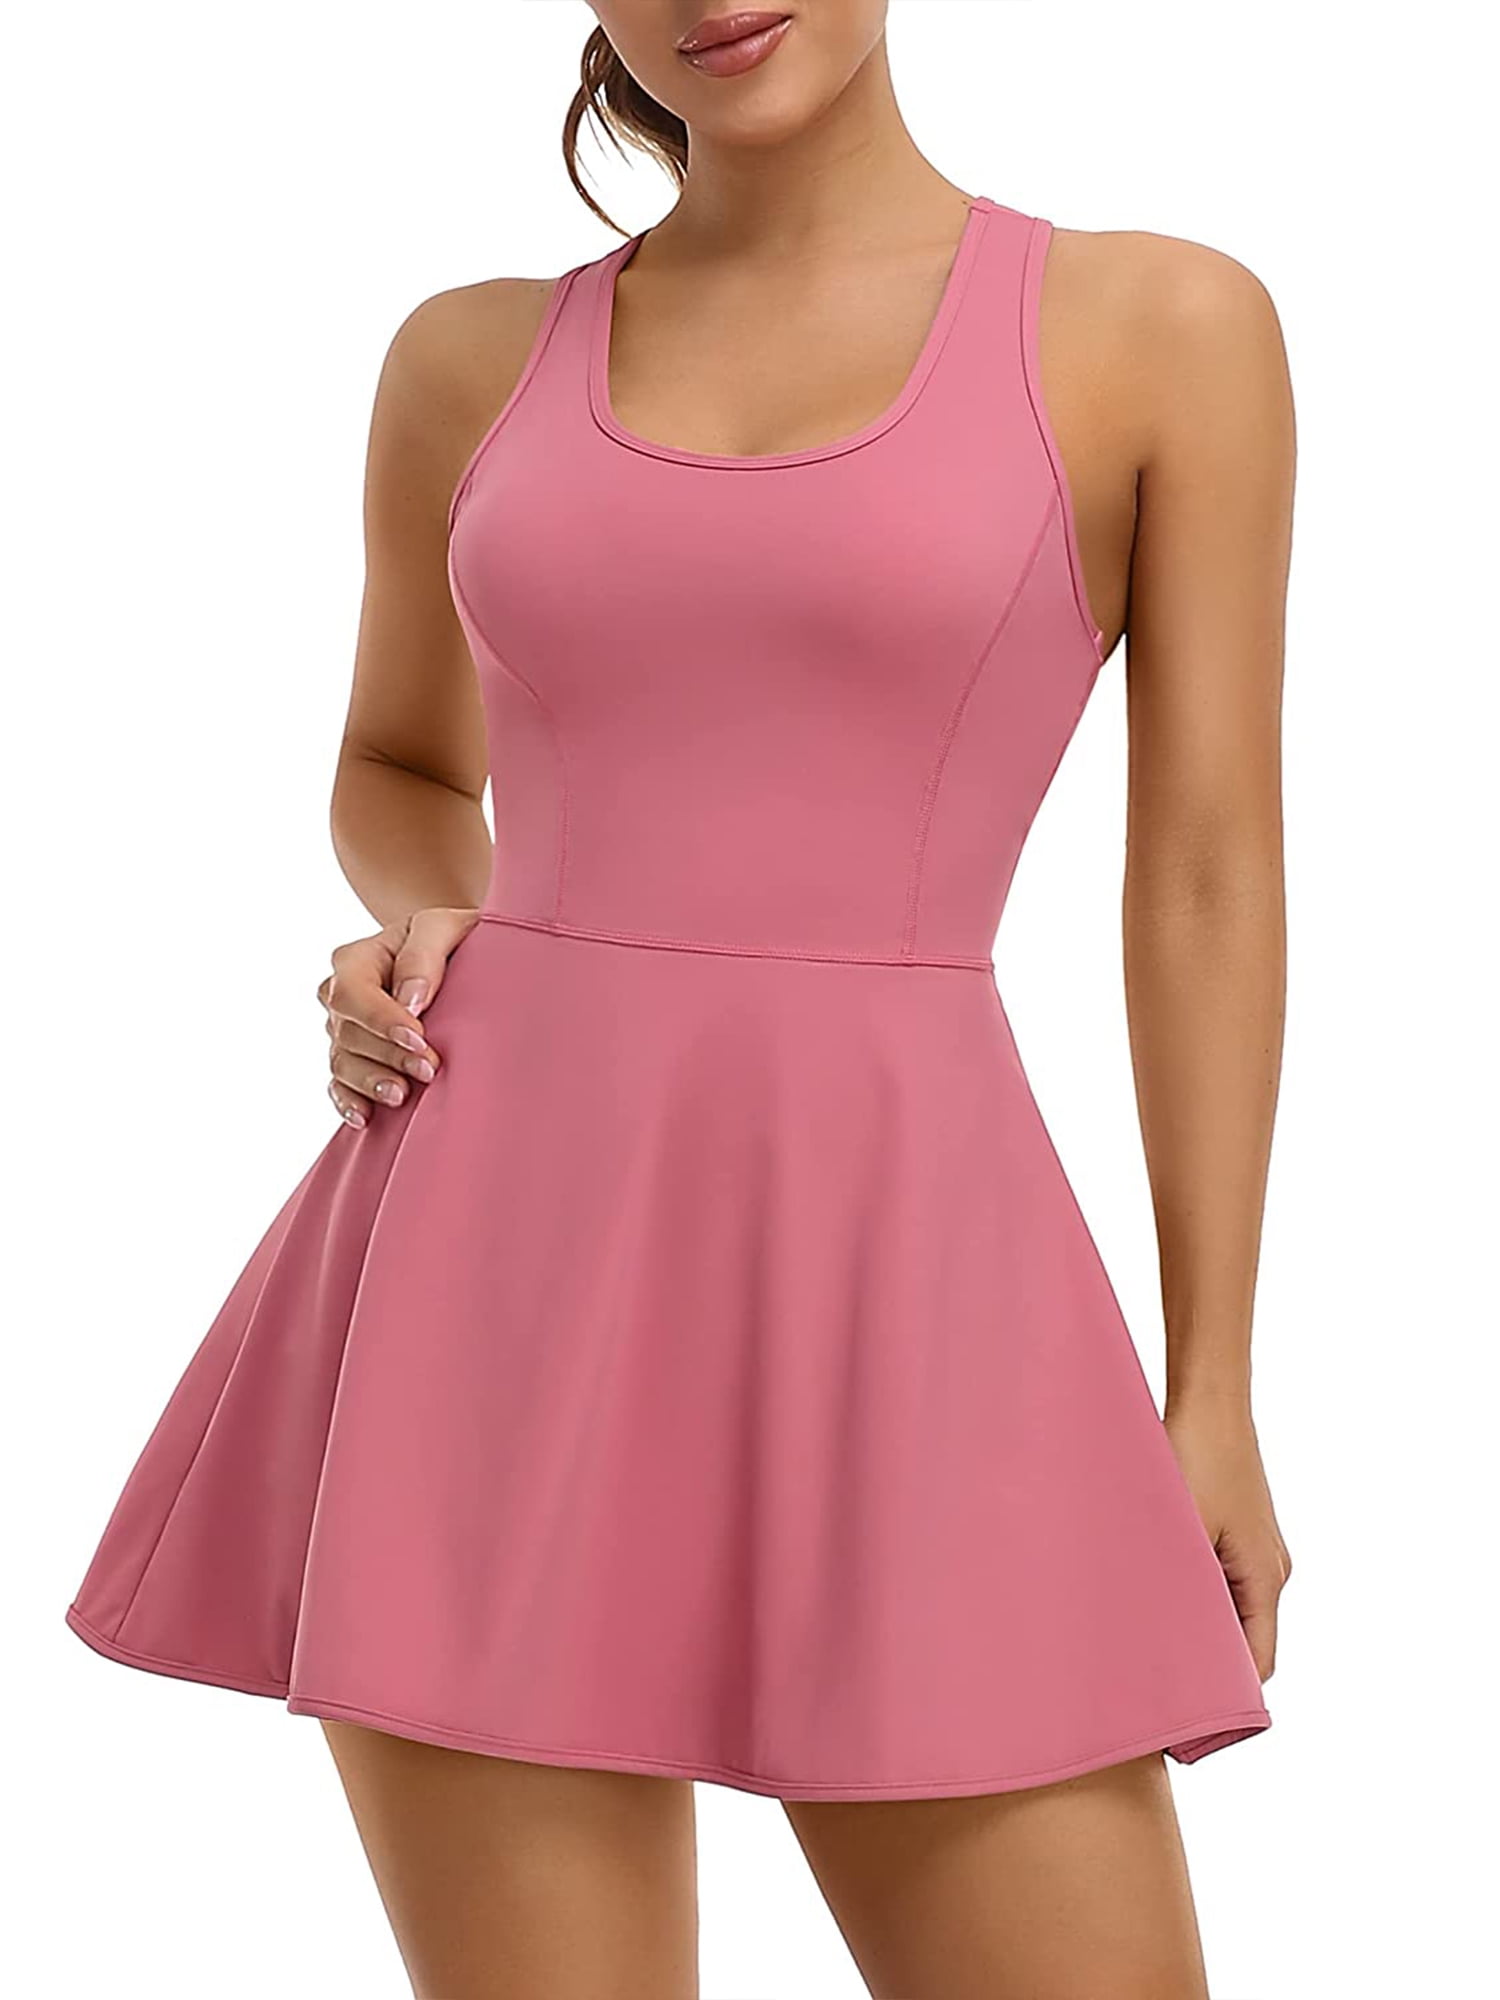 Women's Racerback Tennis Golf Dress with Shorts and Built-in Bra Athletic  Dress with Pockets